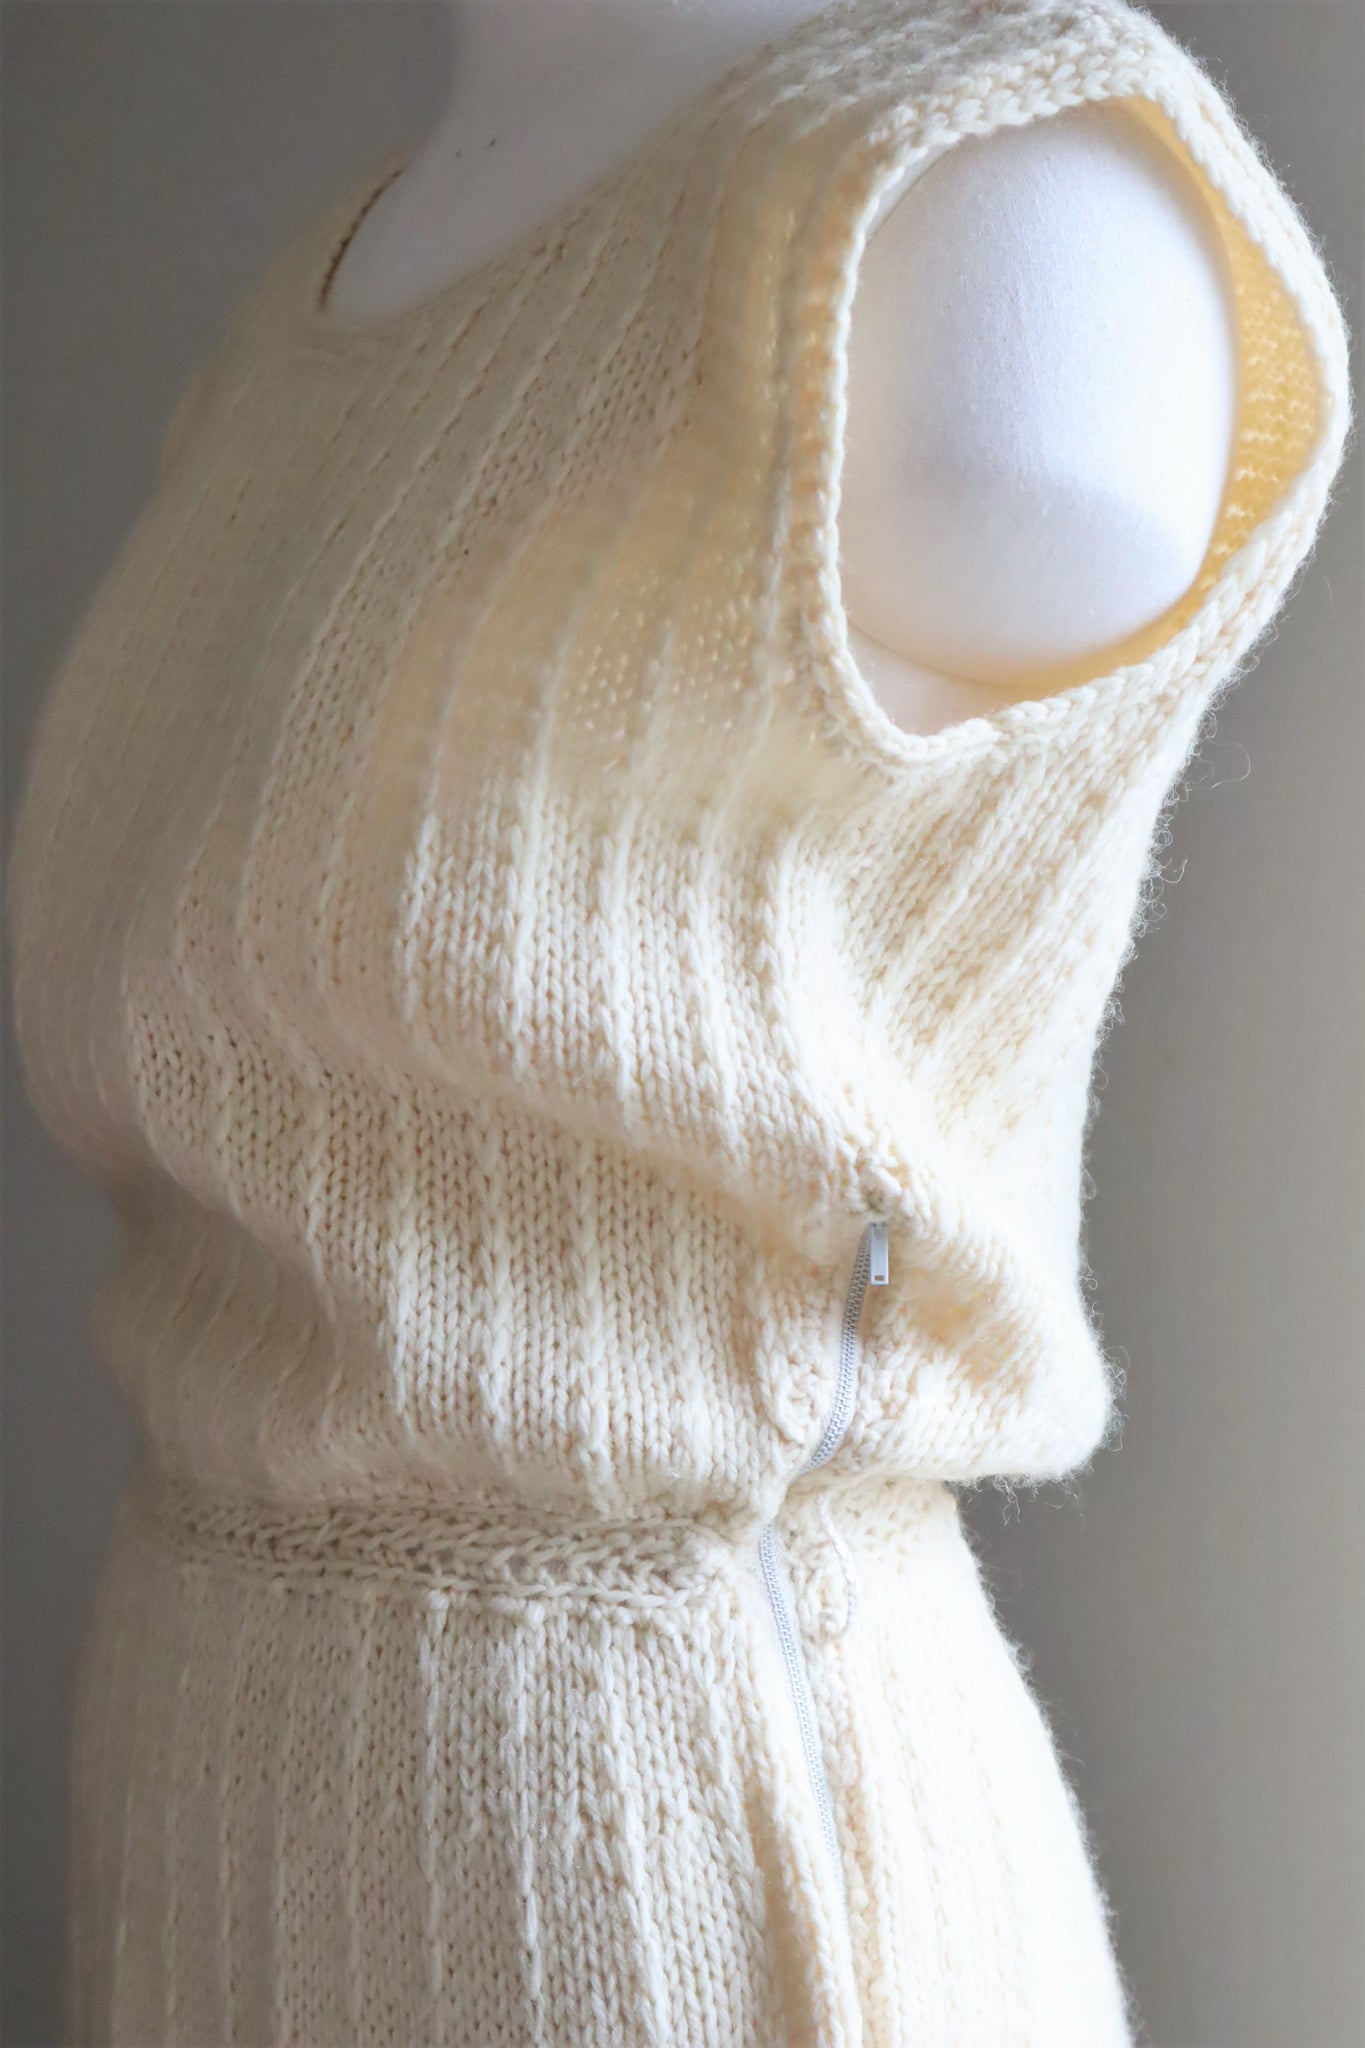 70s Hand-Knitted Wool Dress